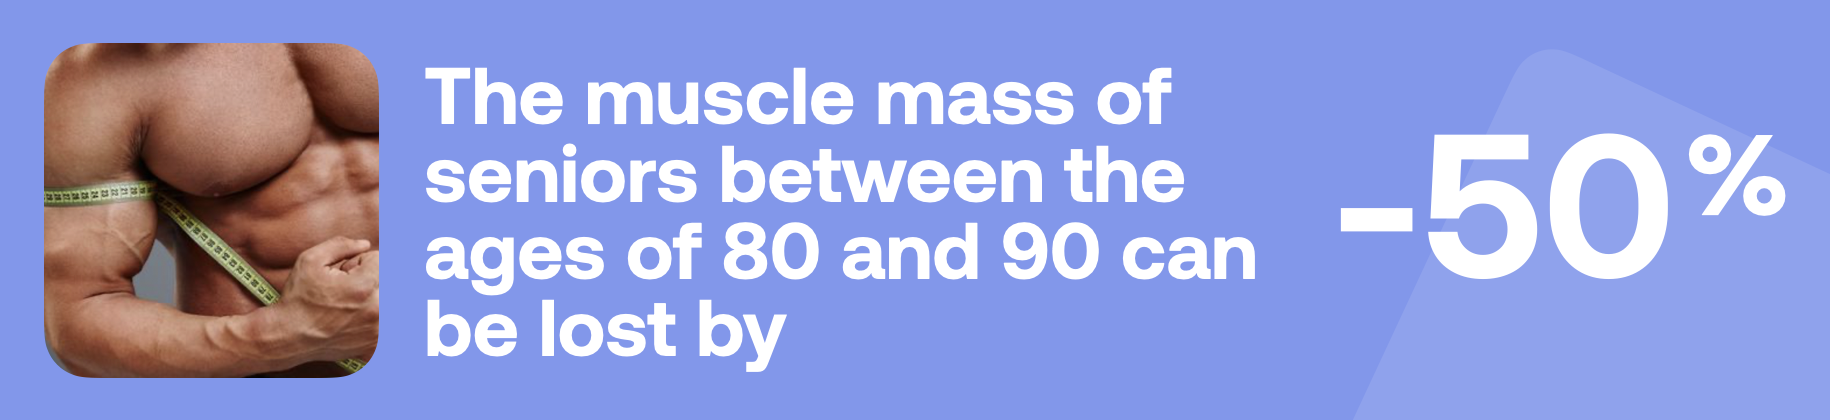 The muscle mass of seniors between the ages of 80 and 90 can be lost by -50%